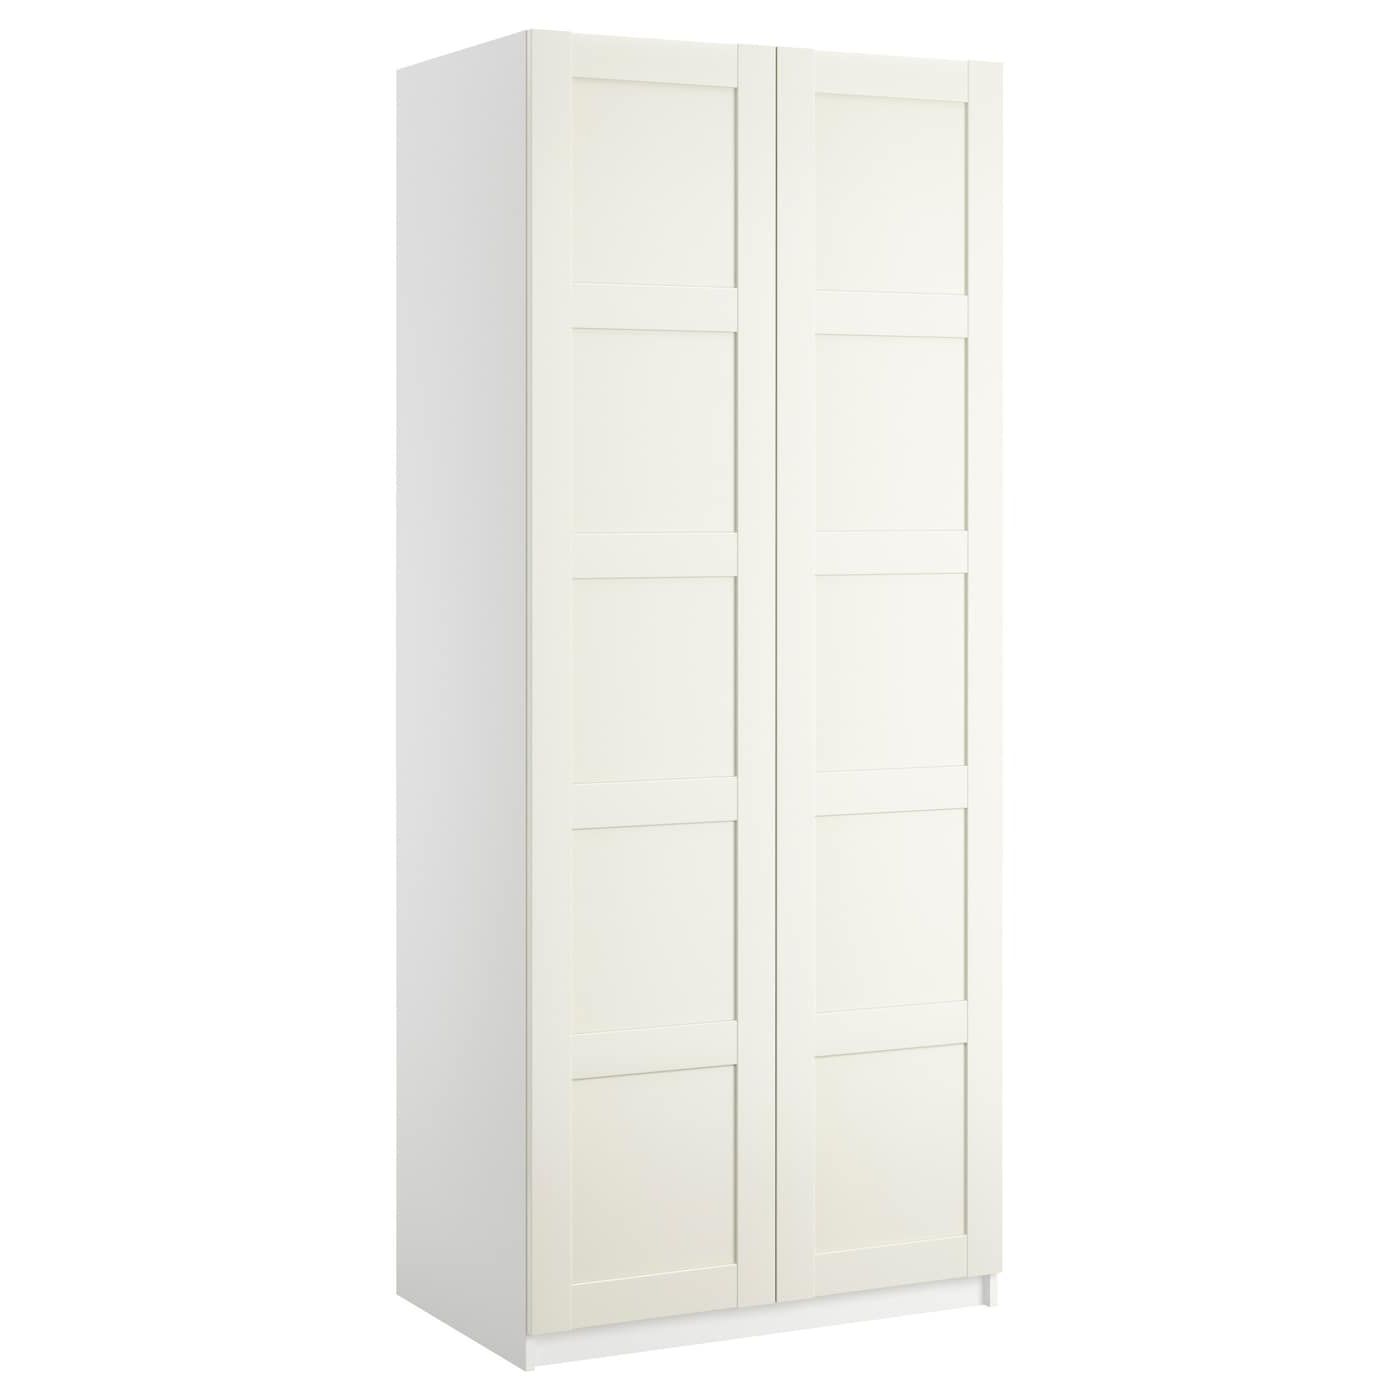 Pax / Bergsbo Wardrobe With 2 Doors, White/white, 393/8x235/8x931/8" – Ikea Inside Two Door White Wardrobes (View 4 of 20)